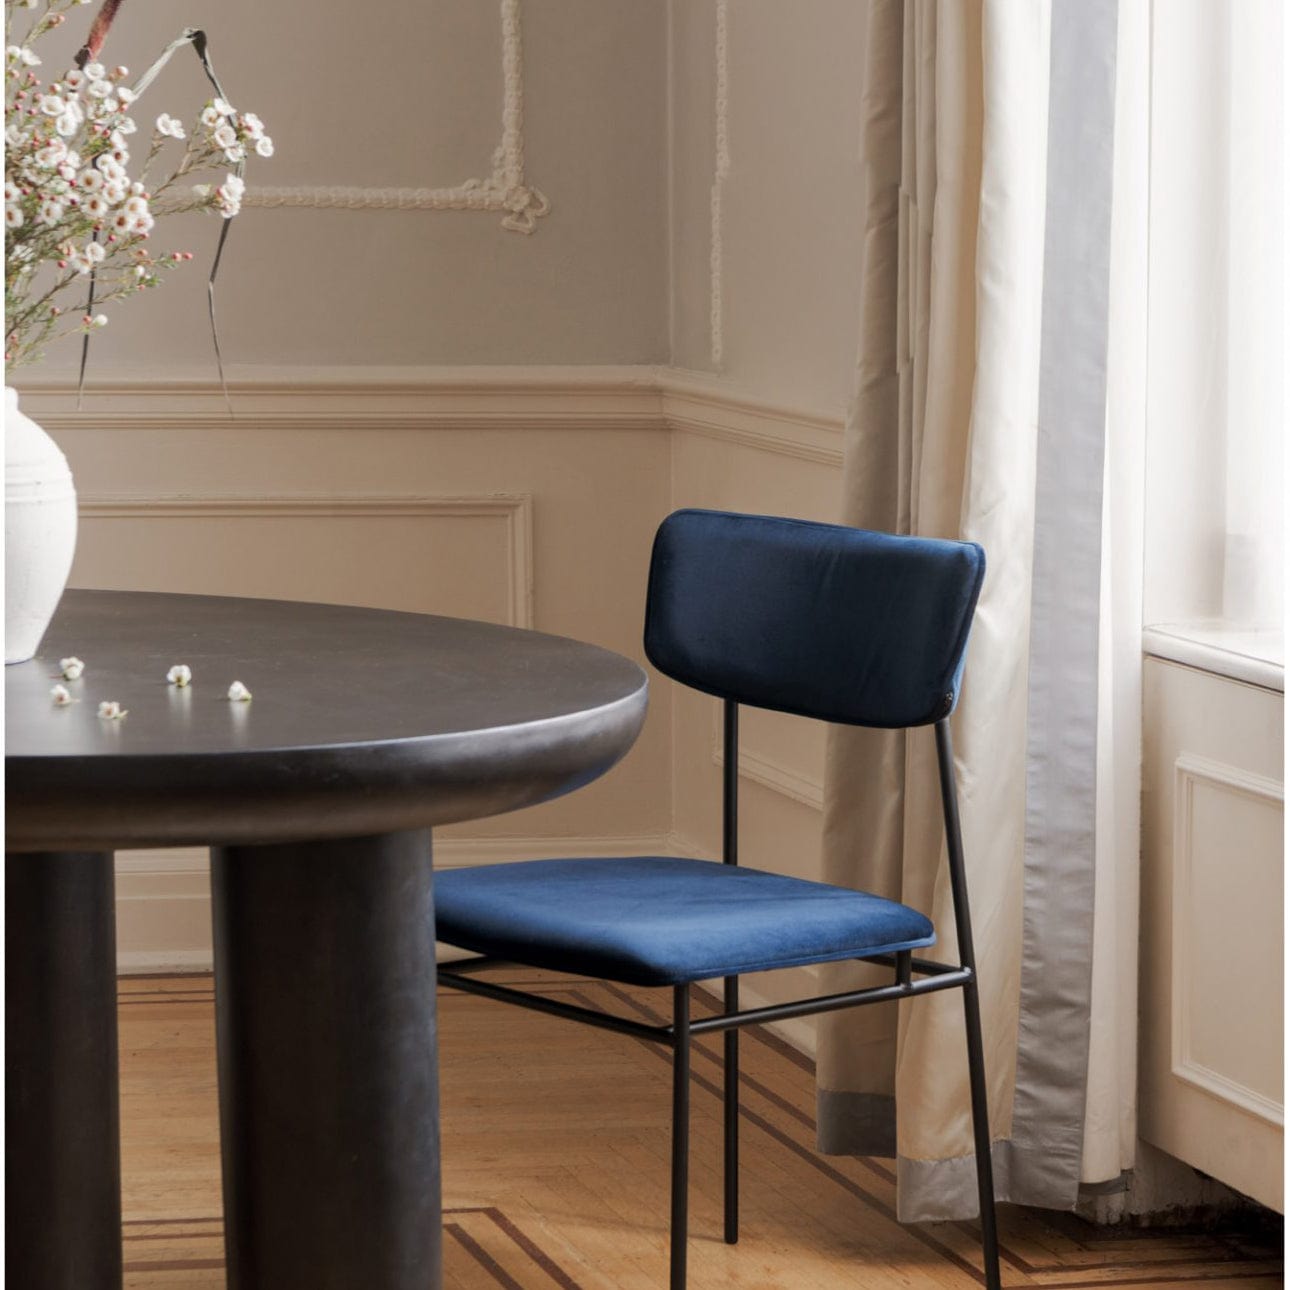 Altobasso Round Blue Dining Table Cafedesart